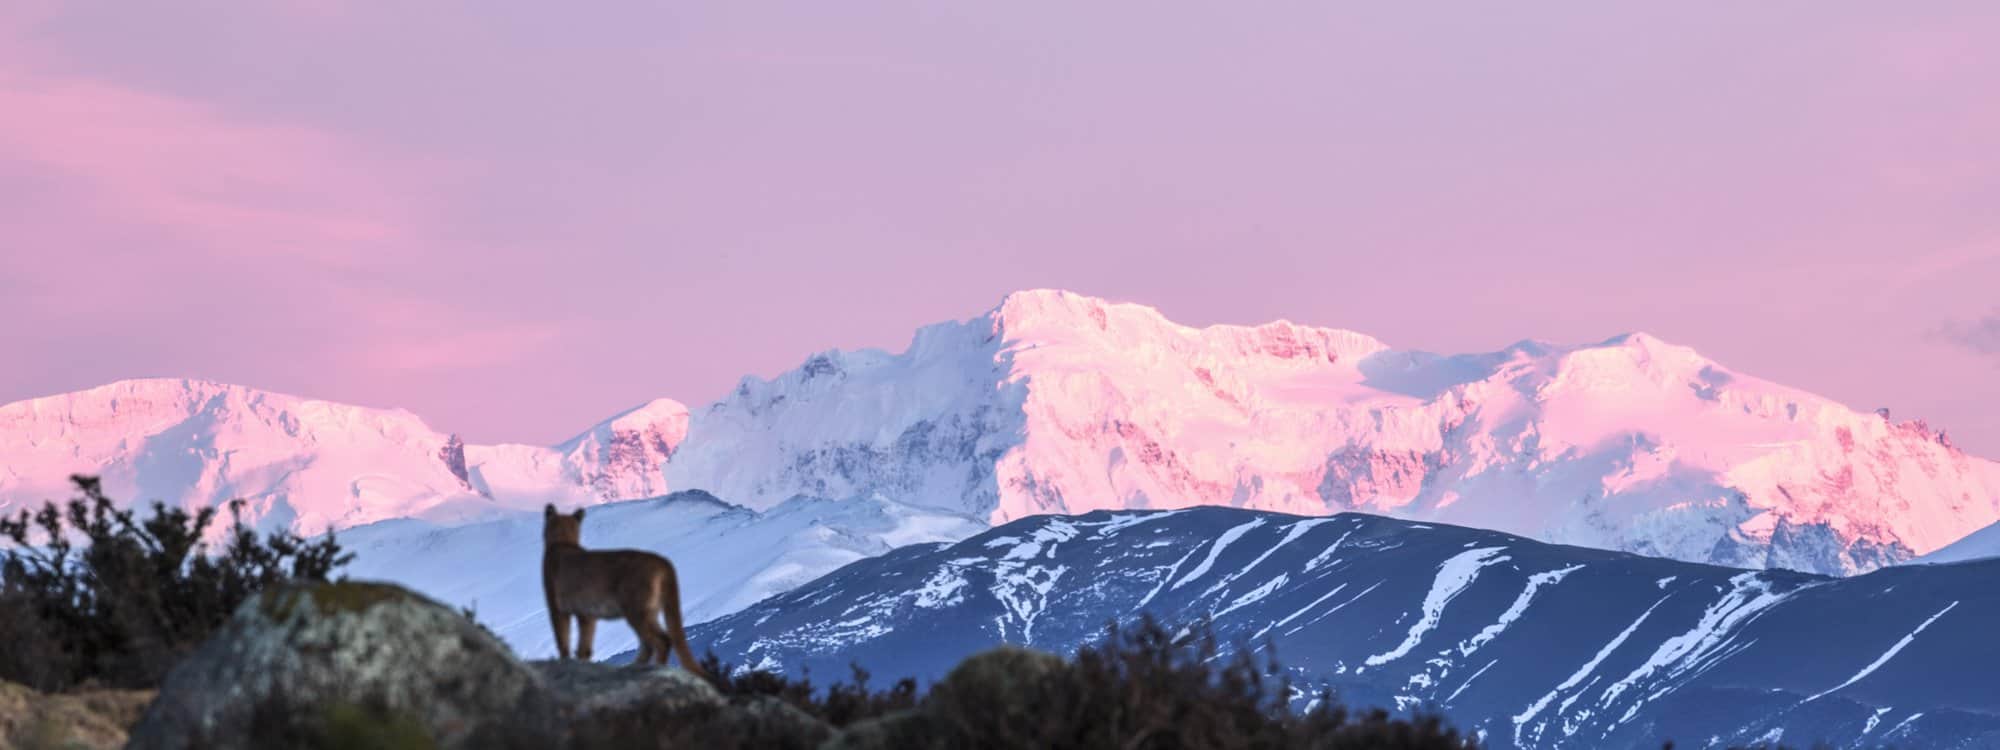 A puma looking out at the Patagonia mountain range during sunrise.